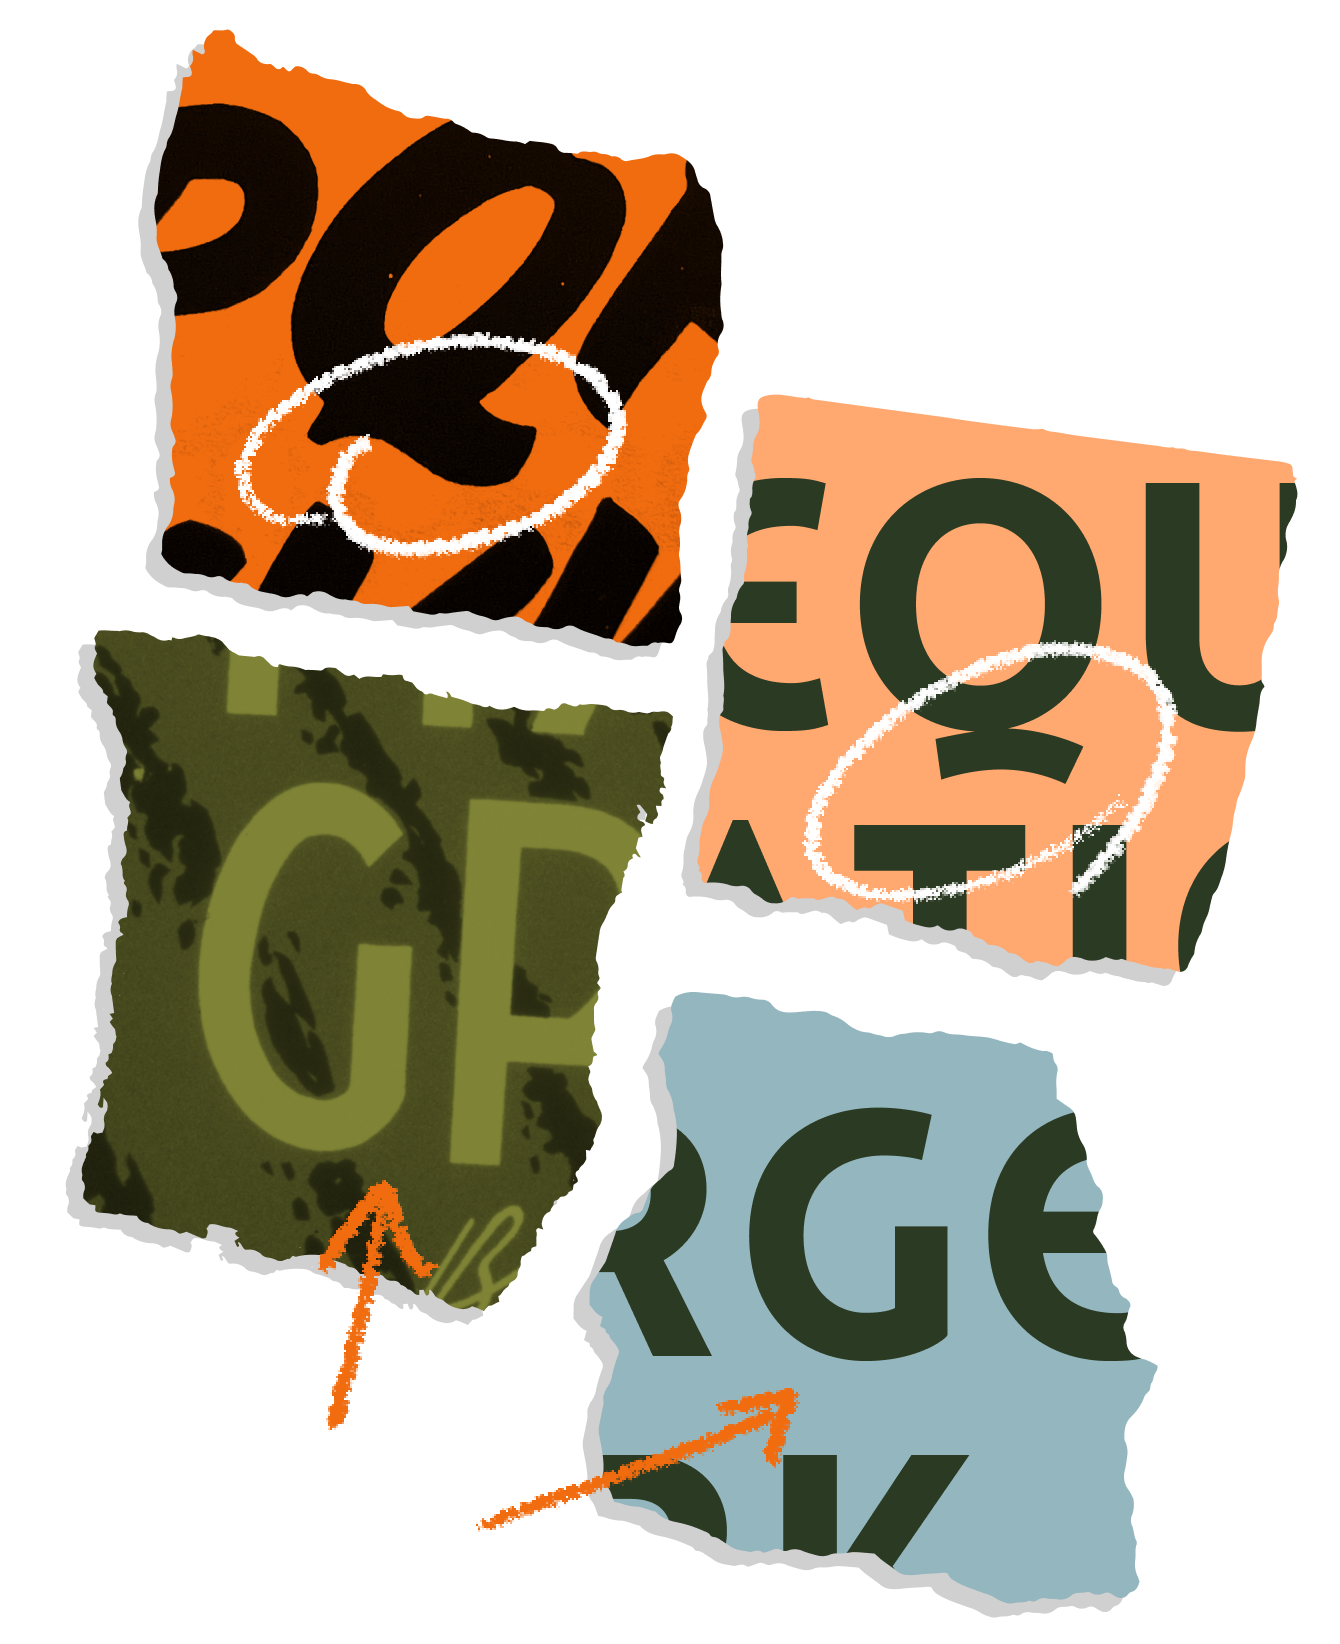 <b class="accent">FIG. 6 — </b> Left, the sign painting samples that inspired unique characteristics of Catlin including  the brush-like ‘Q’ tail (top right) and minimal ‘G’ form (bottom right).